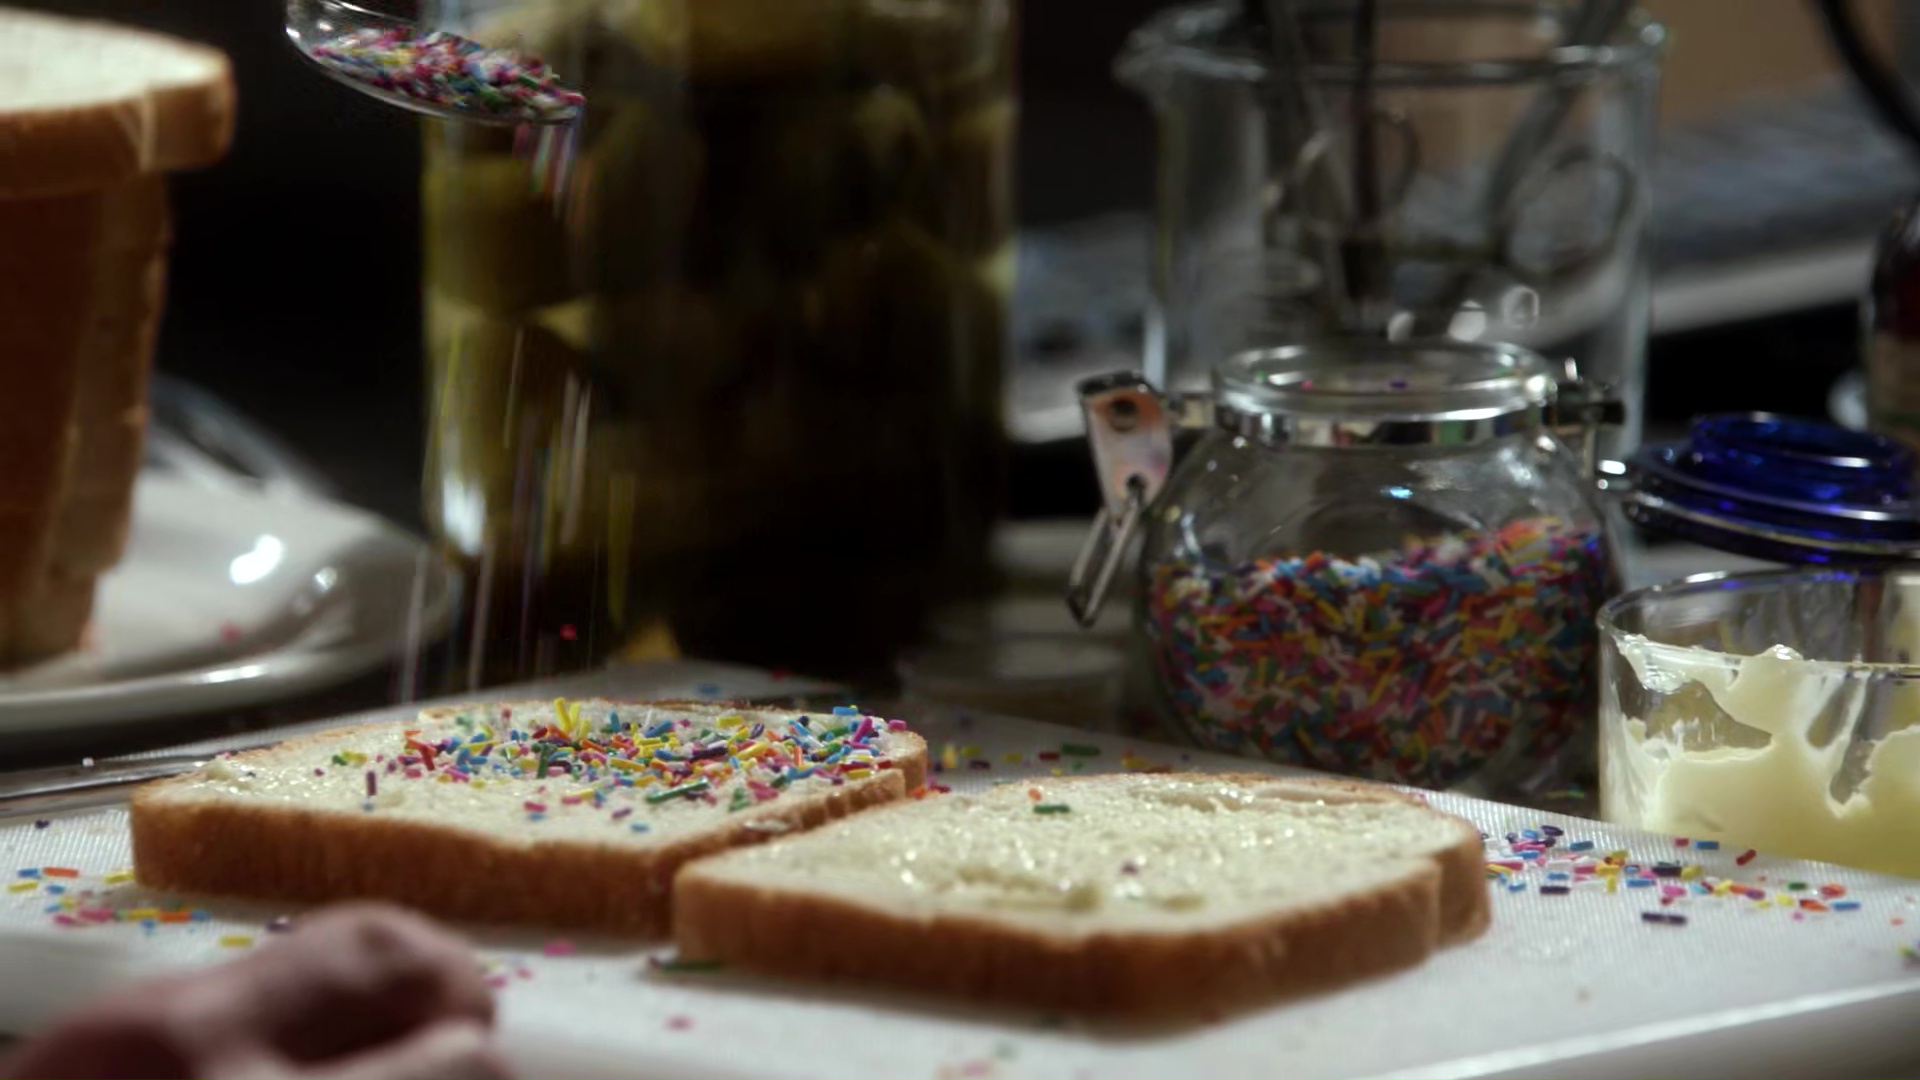 Walter's Food: Butter and rainbow sprinkle sandwich